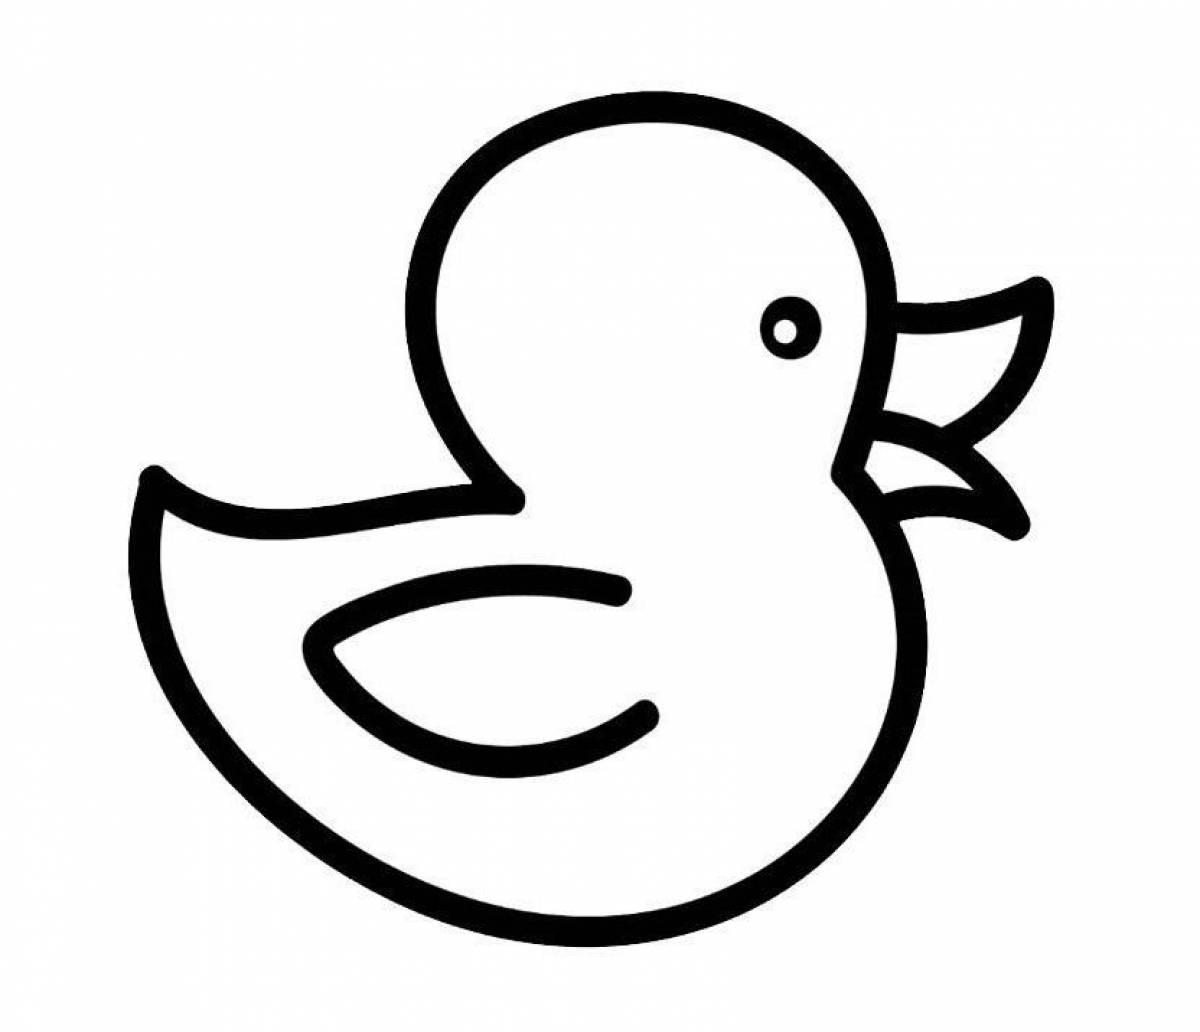 Lalafan duck coloring page